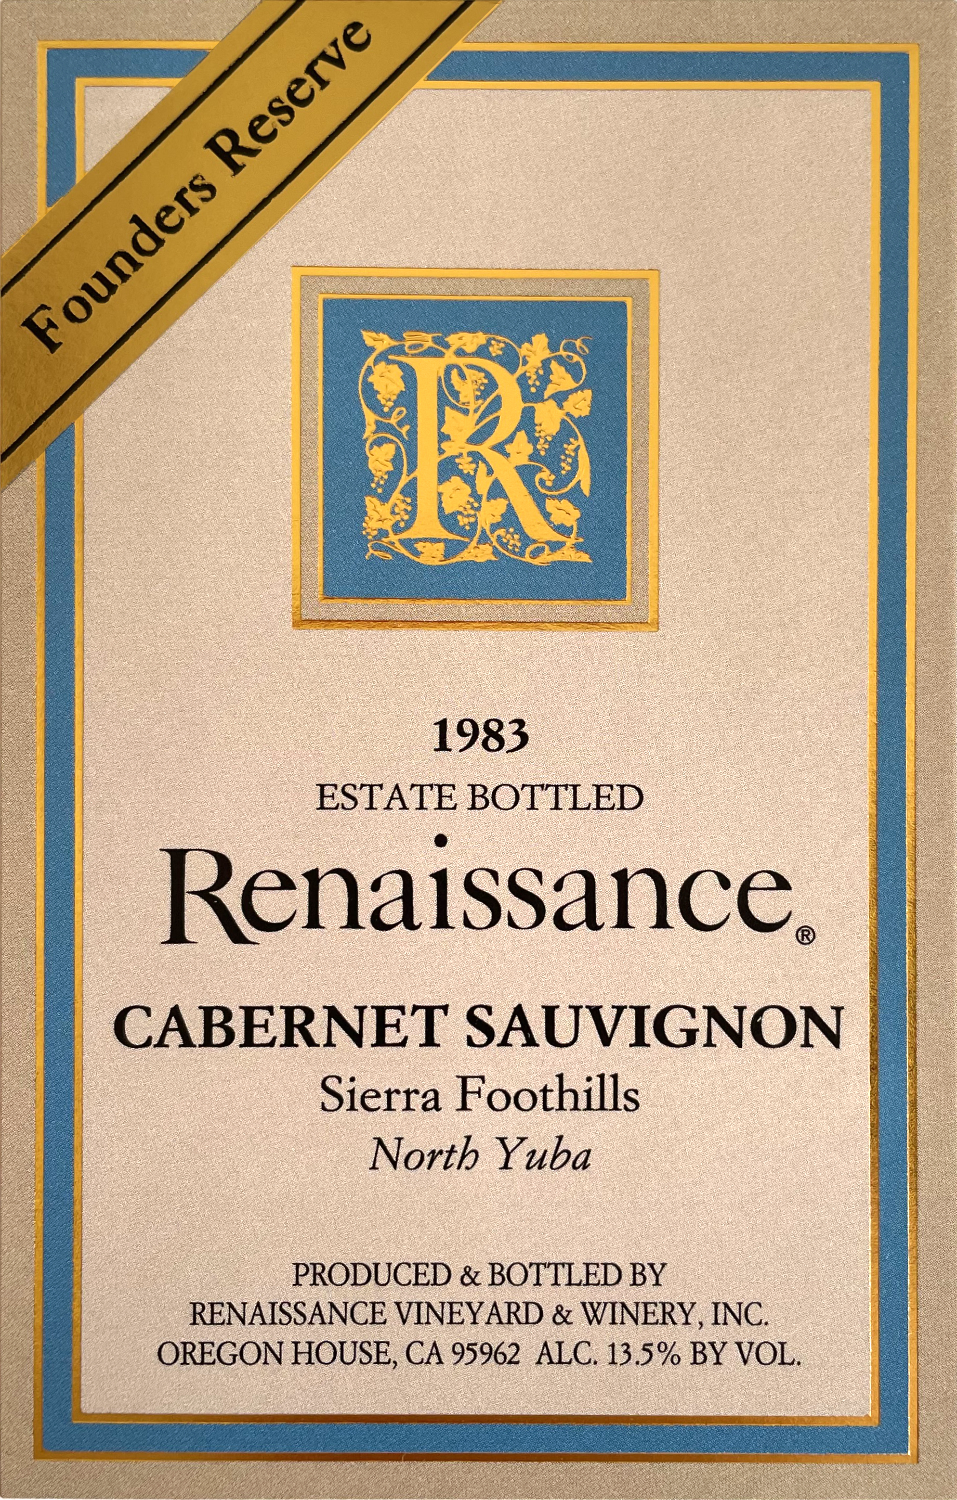 Product Image for 1983 Cabernet Sauvignon Founder's Reserve 750 ml